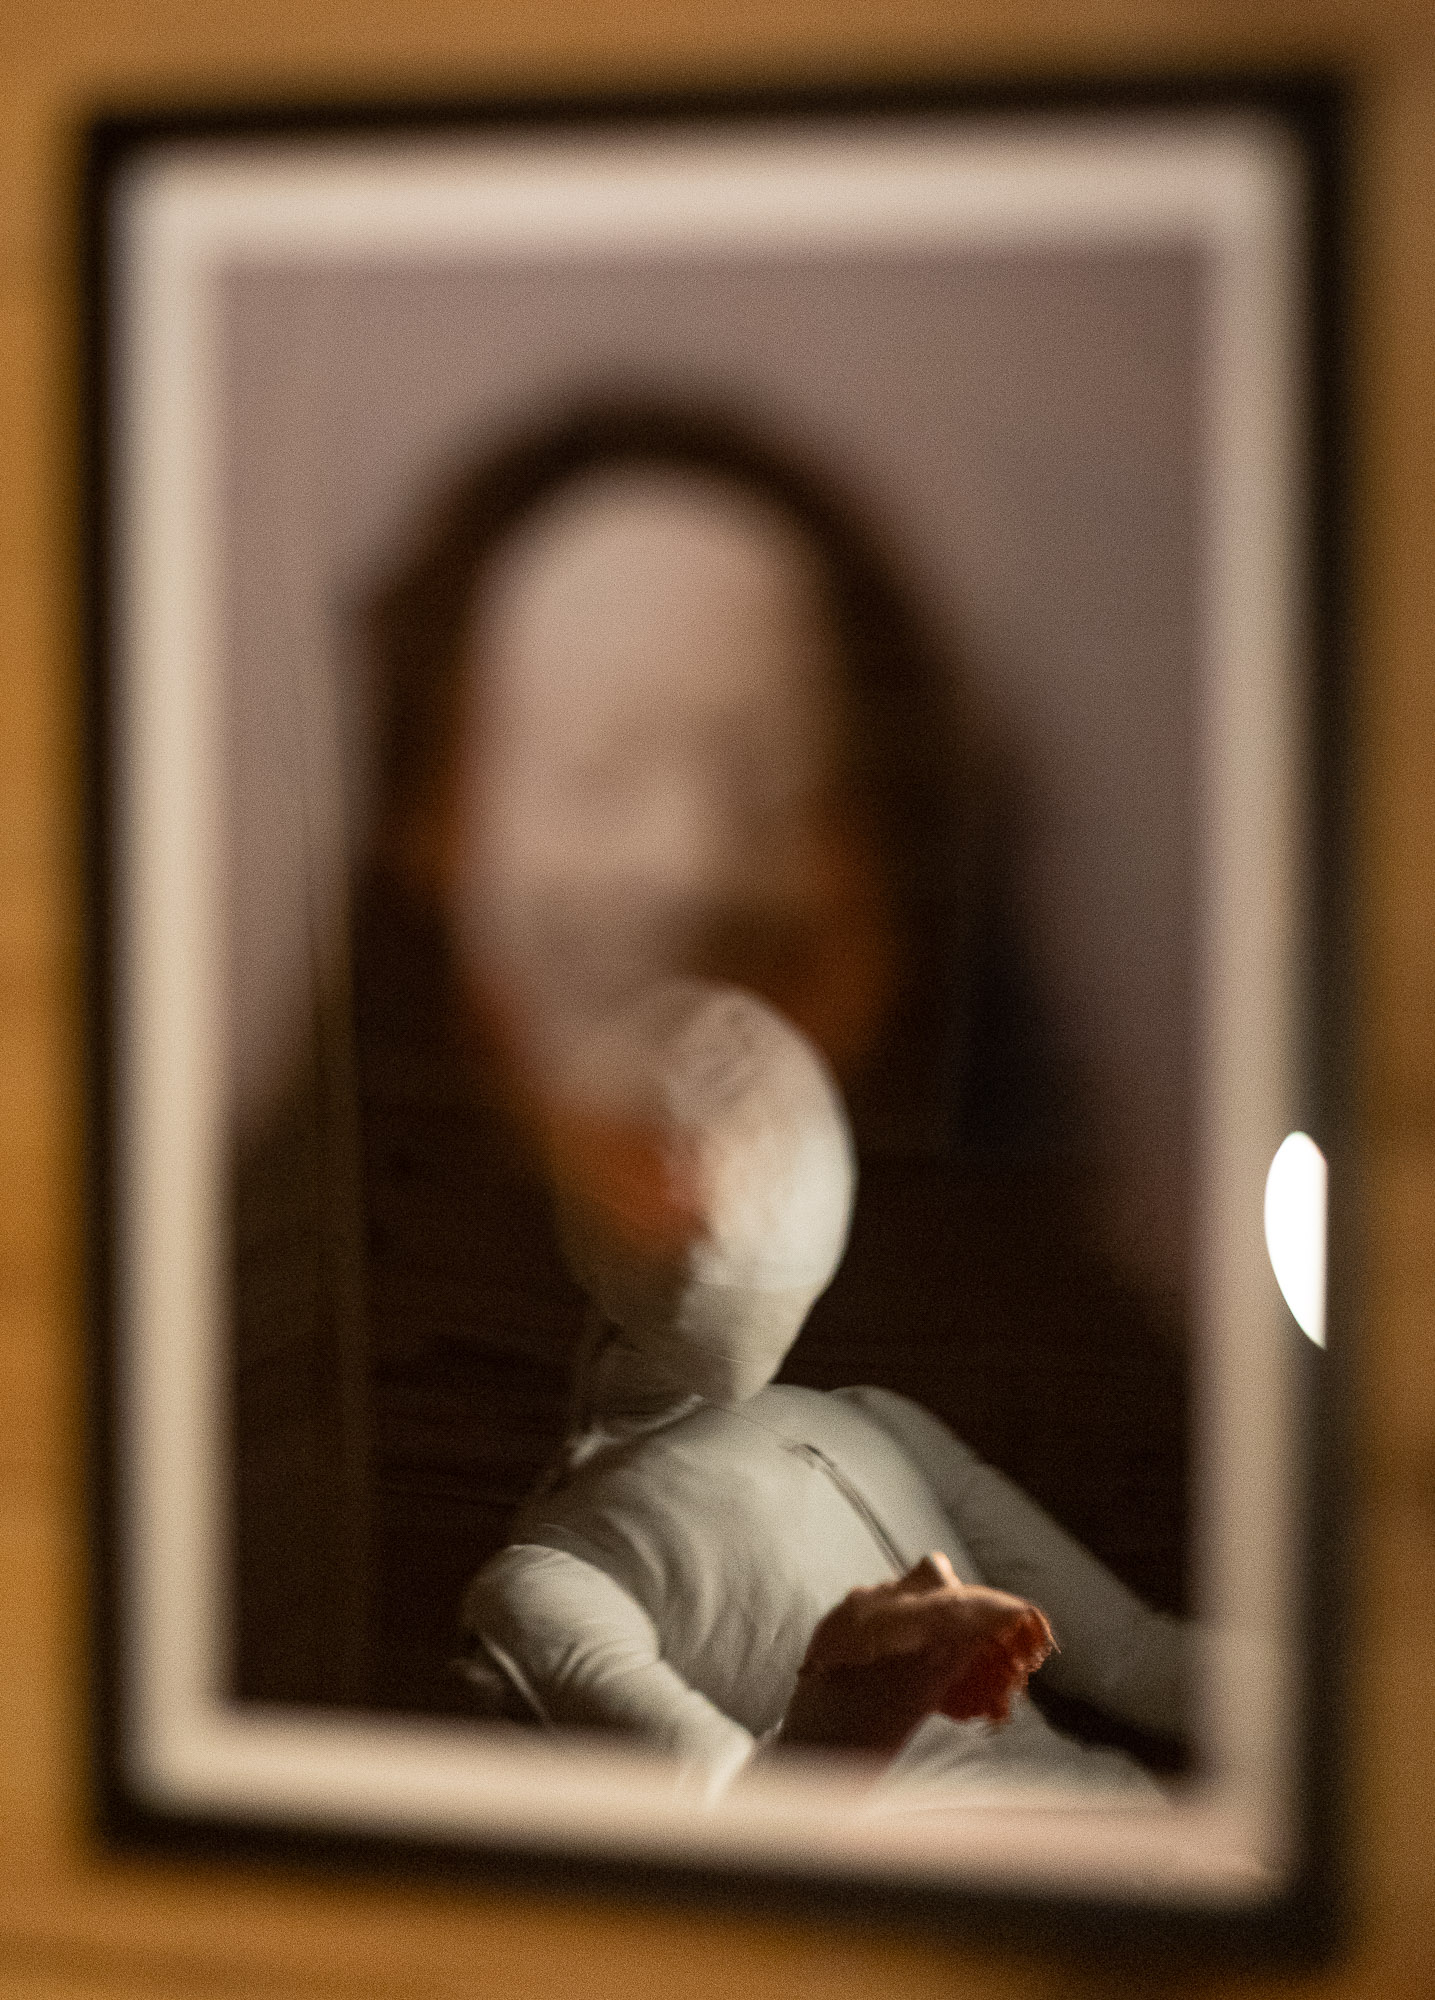 The humanoid figure reflected on the artist's portrait,